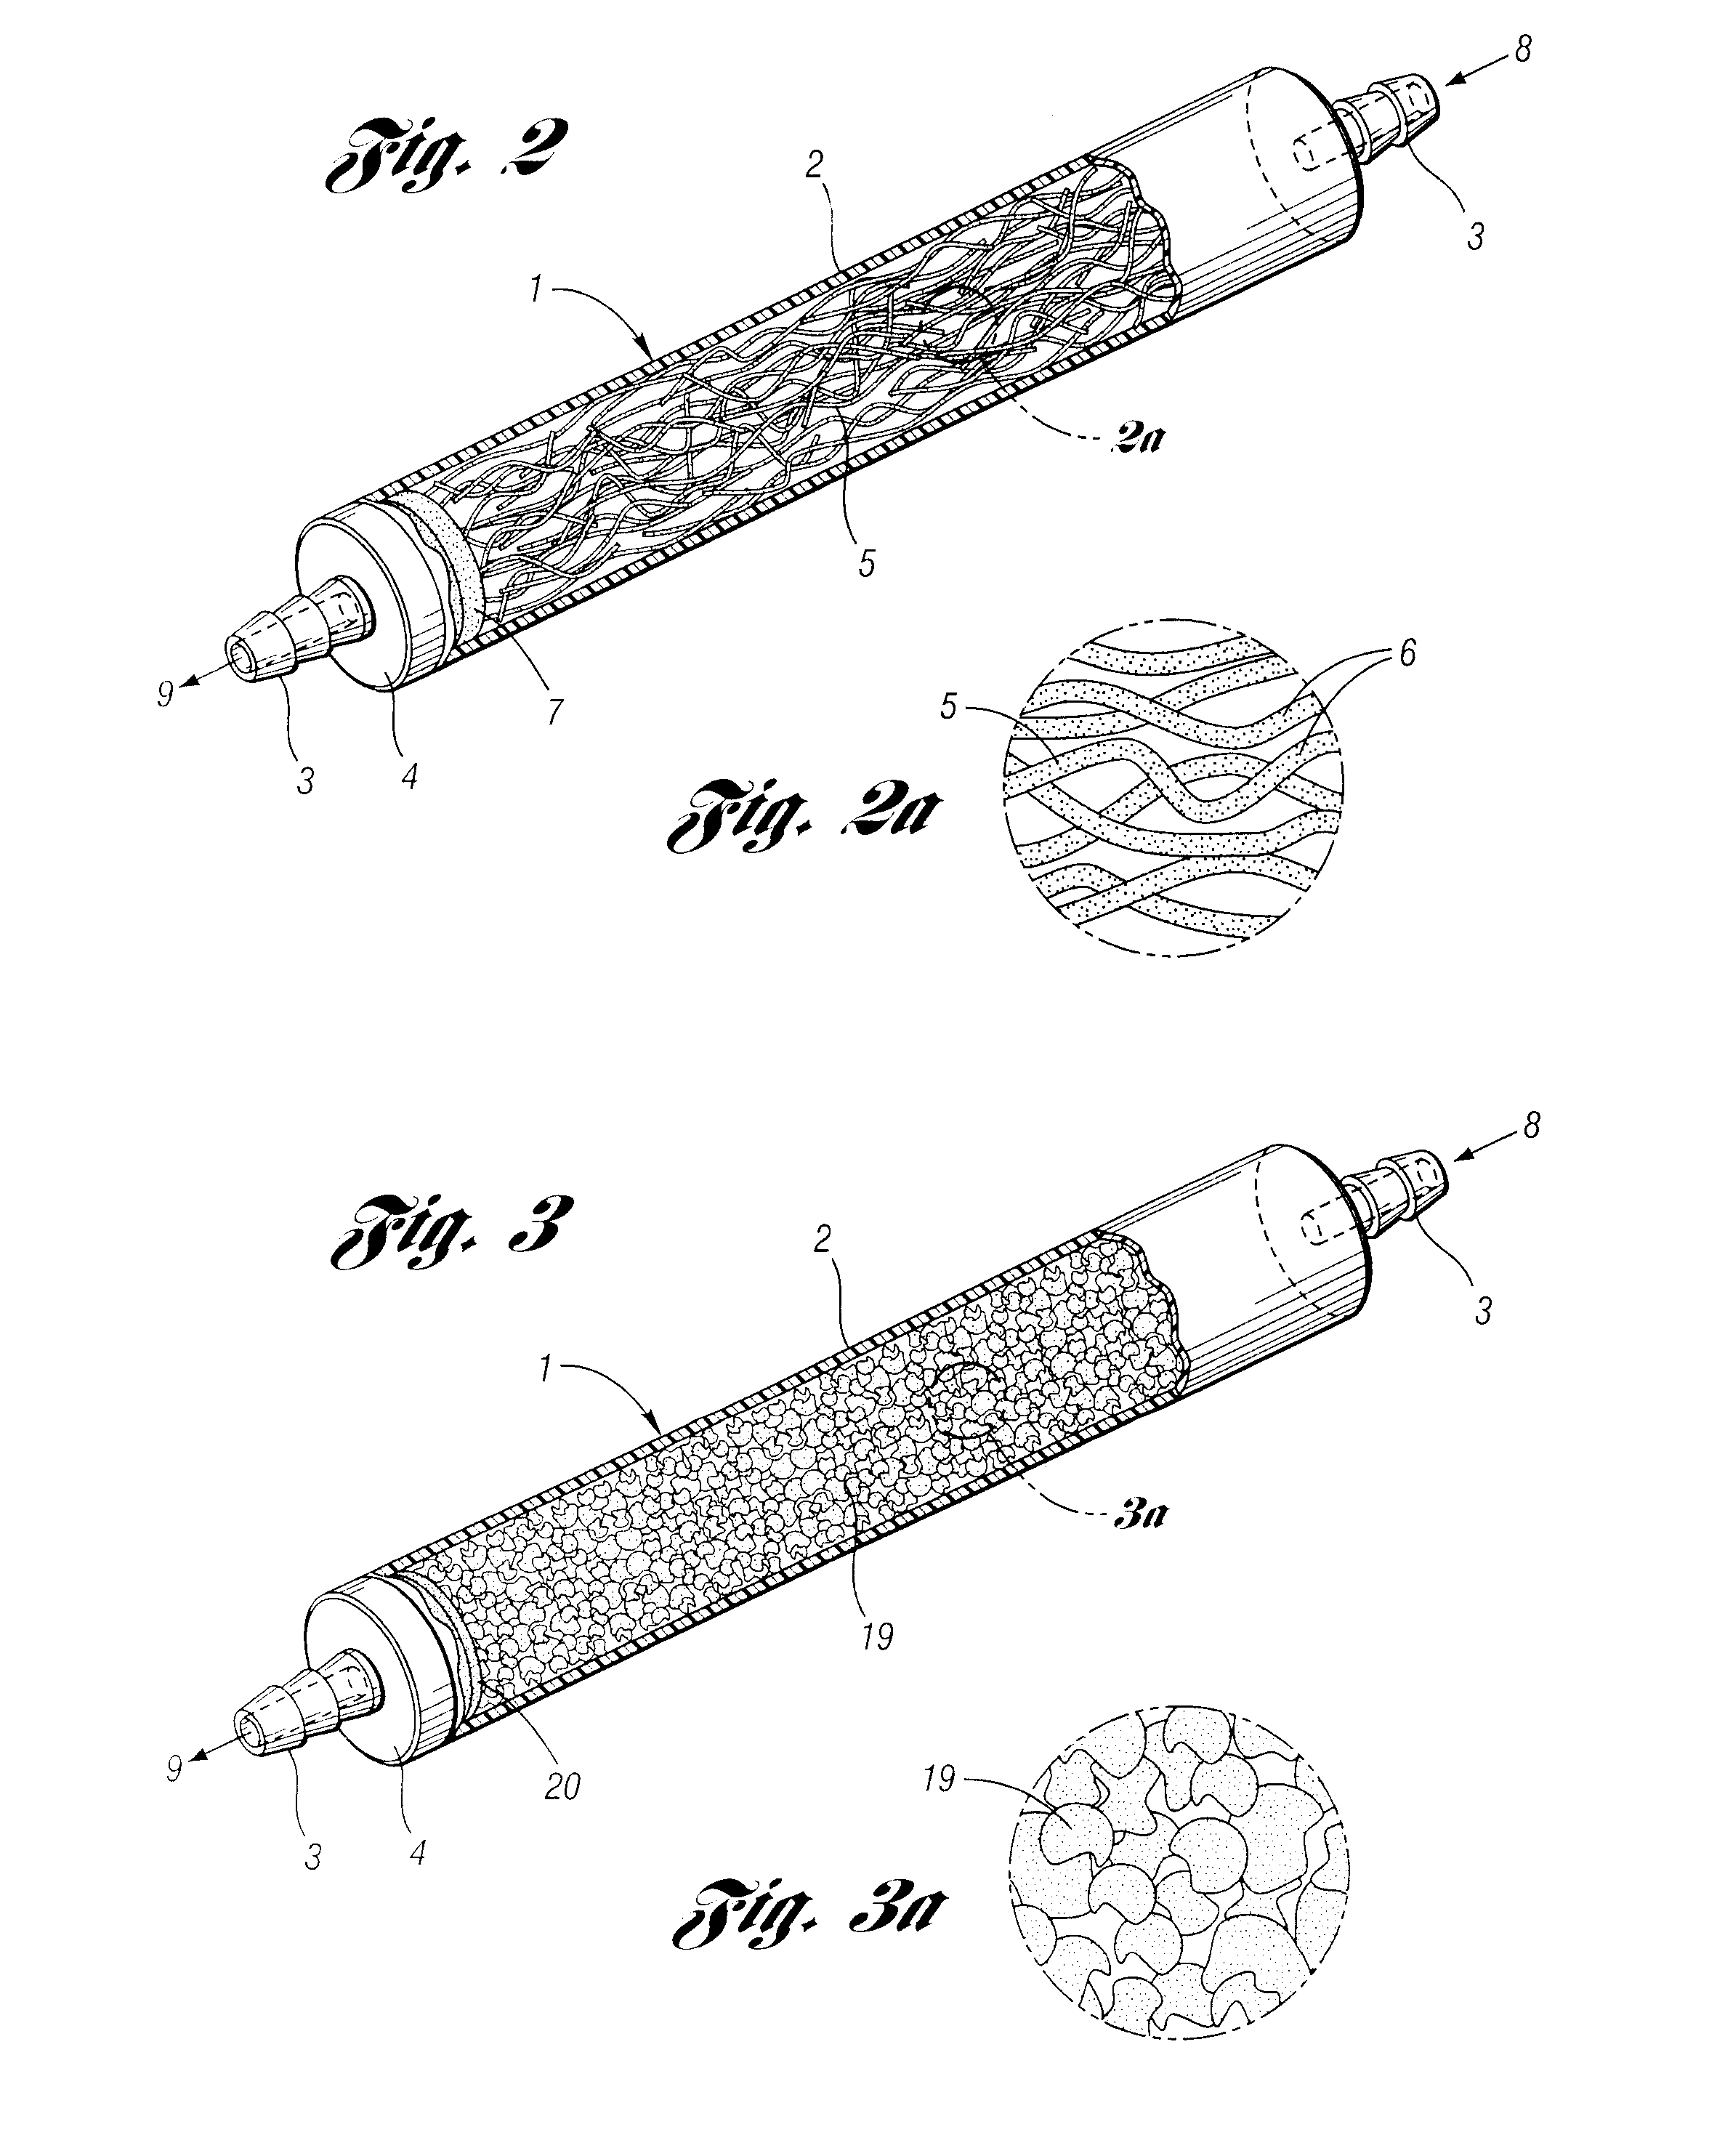 Method For Supplying Oxygenated Water To Promote Internal Healing